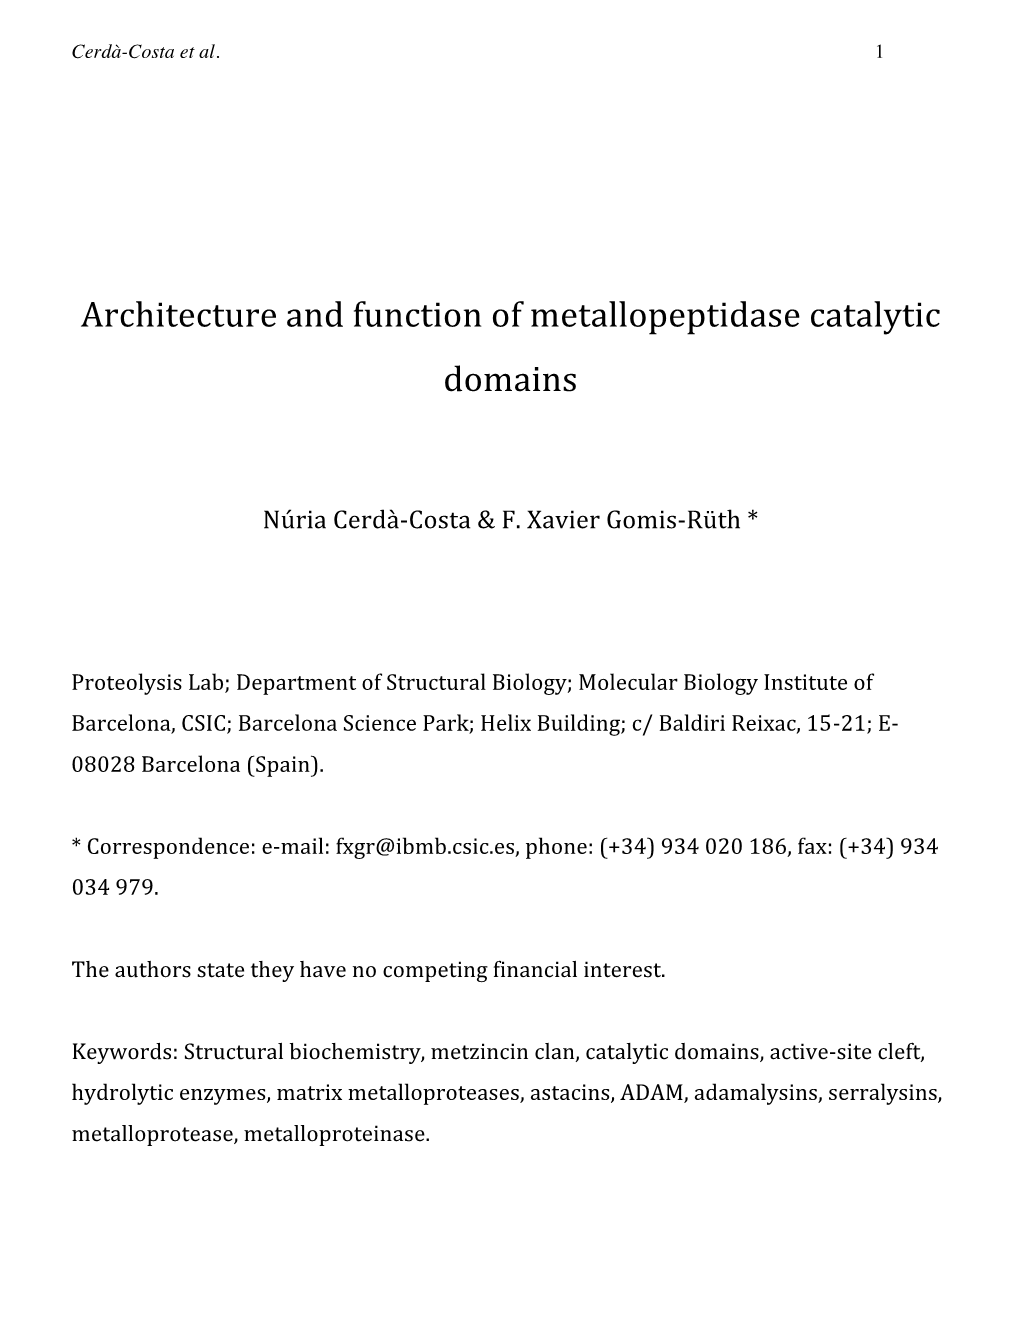 Architecture and Function of Metallopeptidase Catalytic Domains